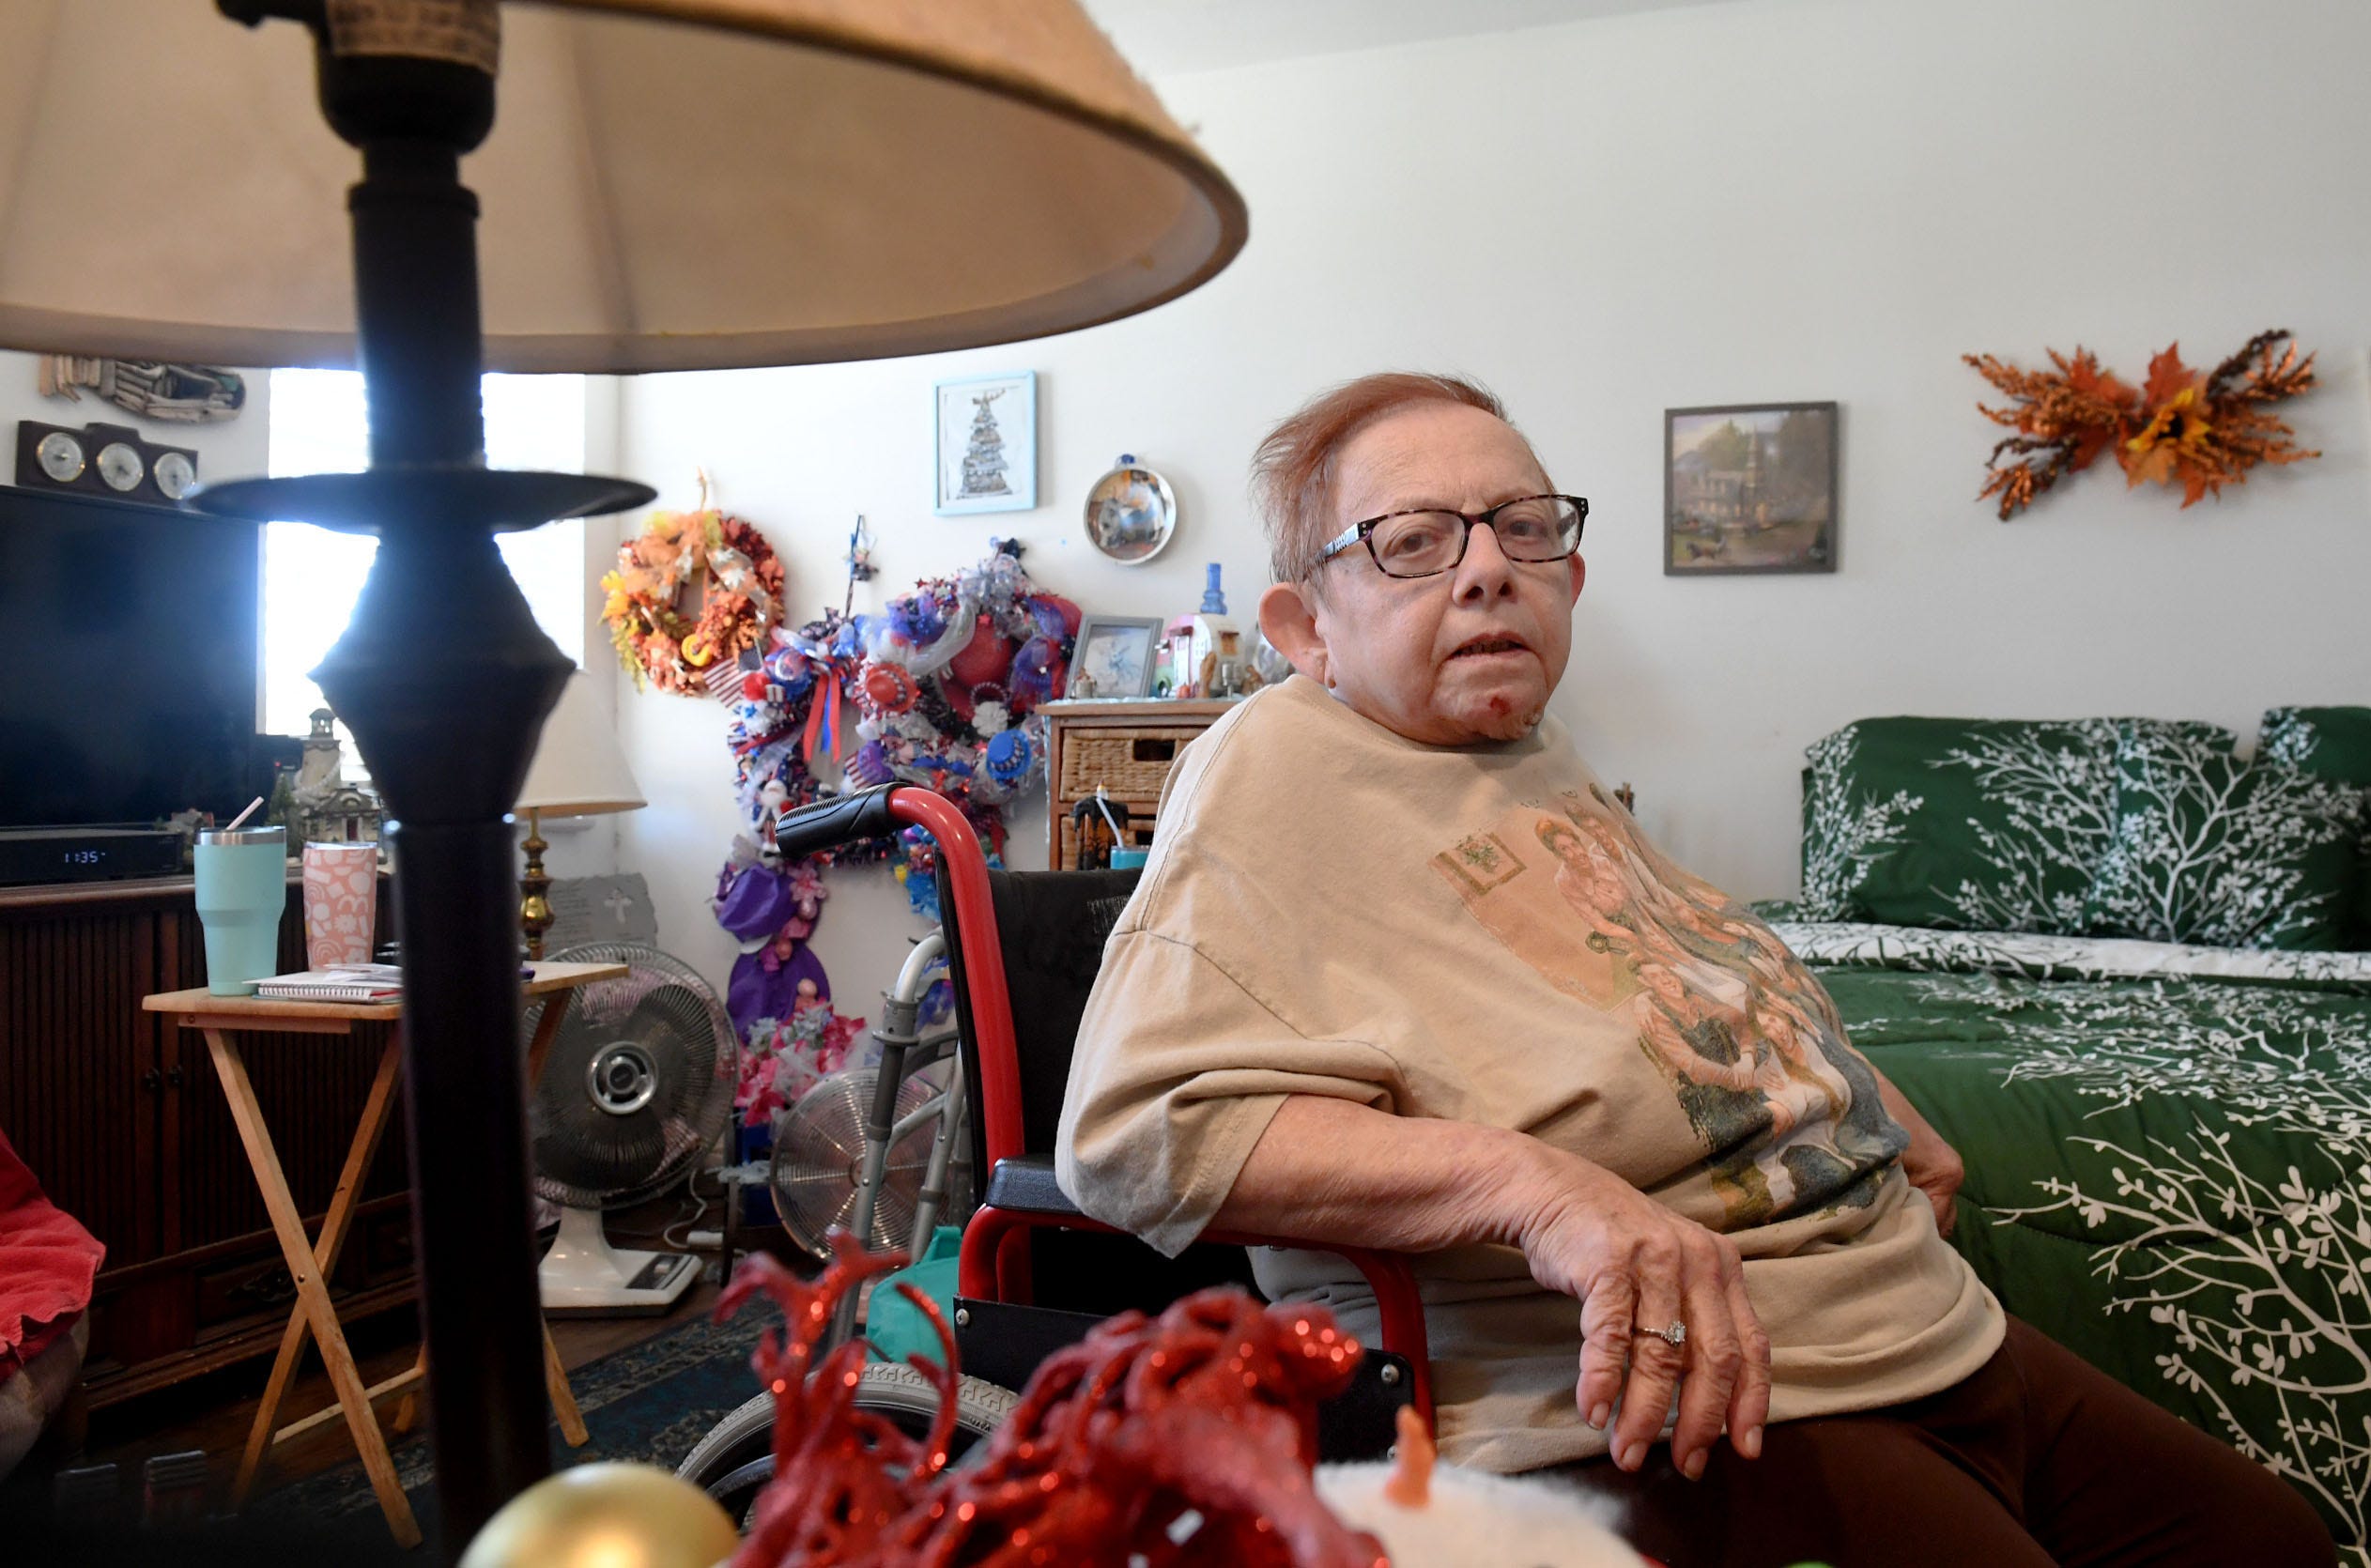 Marie Smith, 78, of Oxnard, pays $1,425 in rent for a studio apartment and receives $1,427 a month in Social Security. Every month, she has to find groups – a church, a nonprofit, a government agency – to help pay rent.